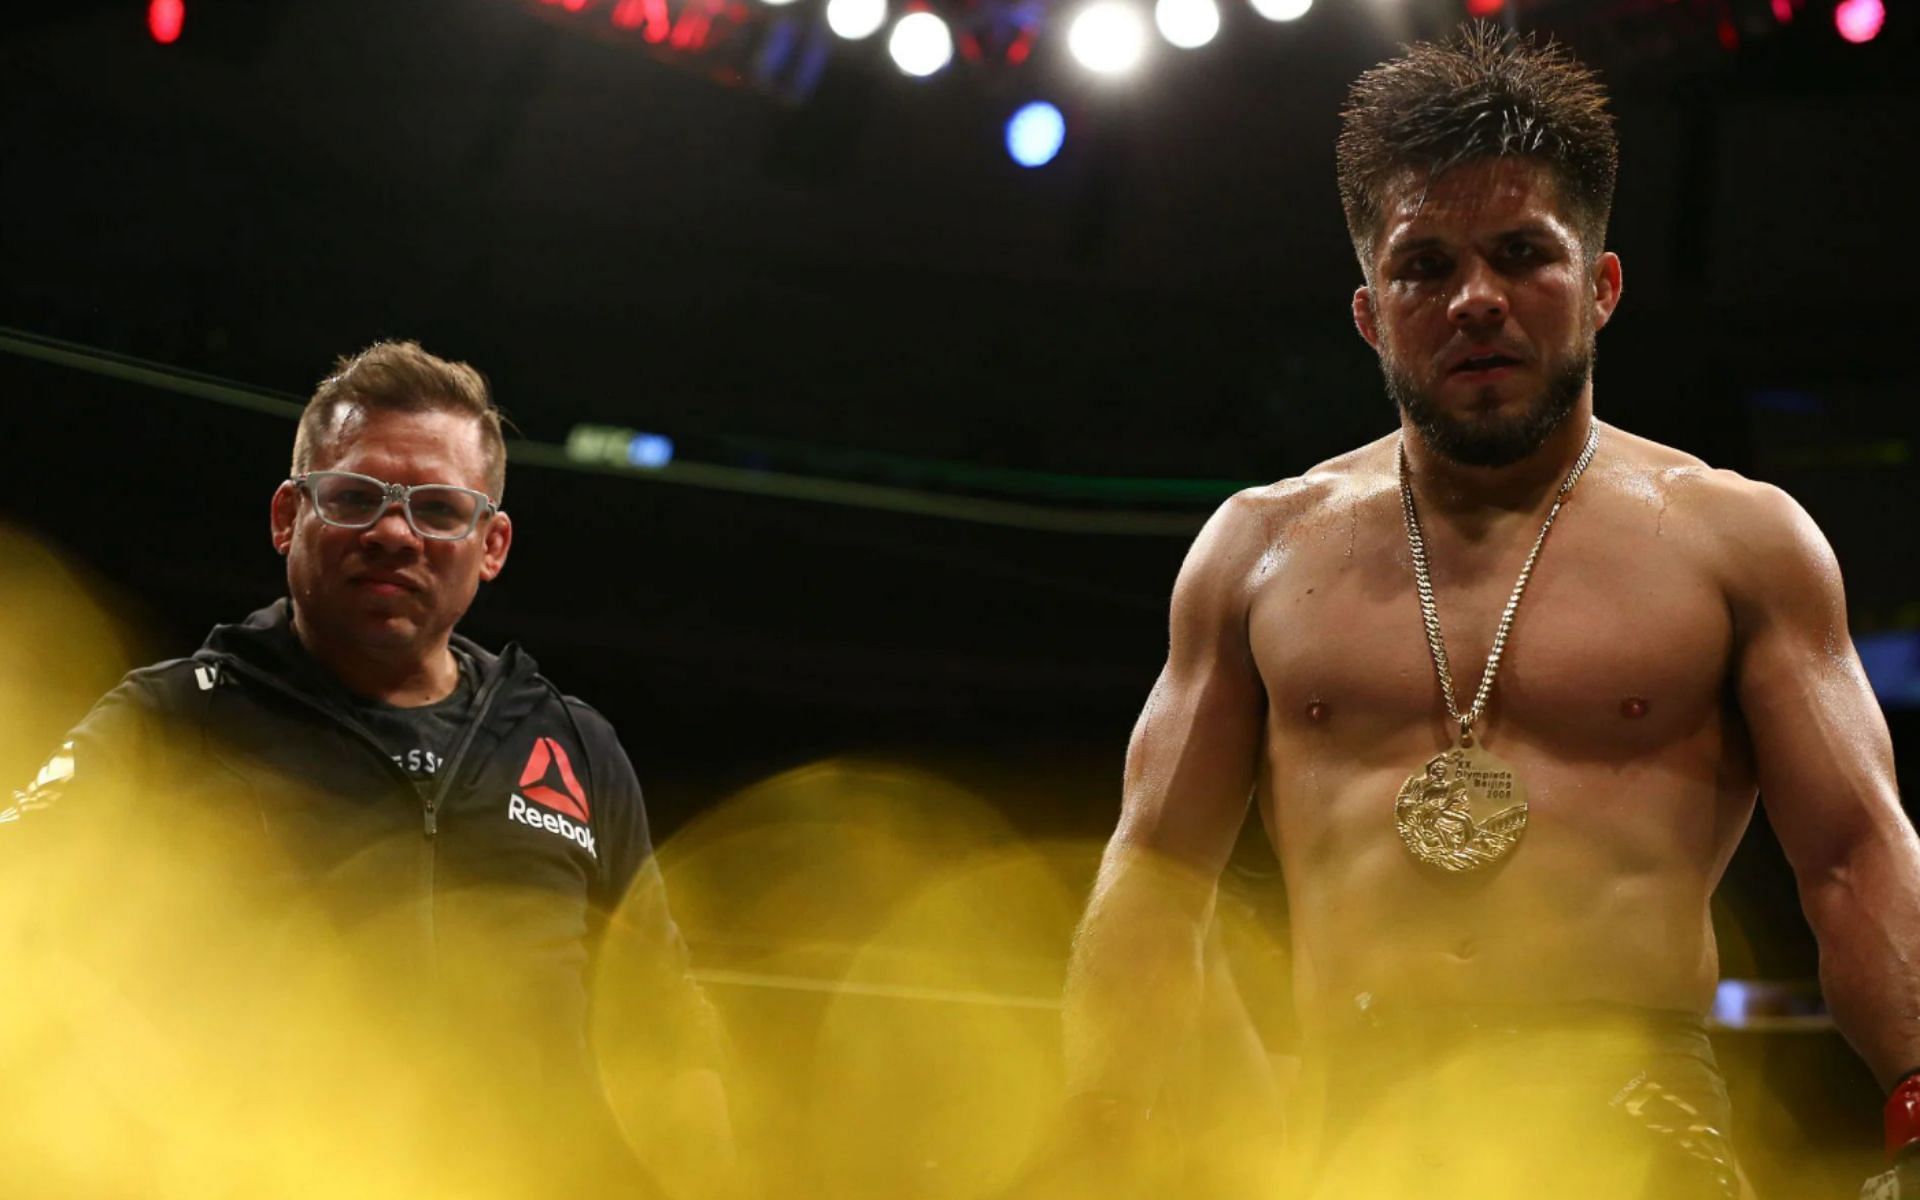 “I don’t got to prove s*** to nobody” – Henry Cejudo not keen on making return if the UFC doesn’t pay him well